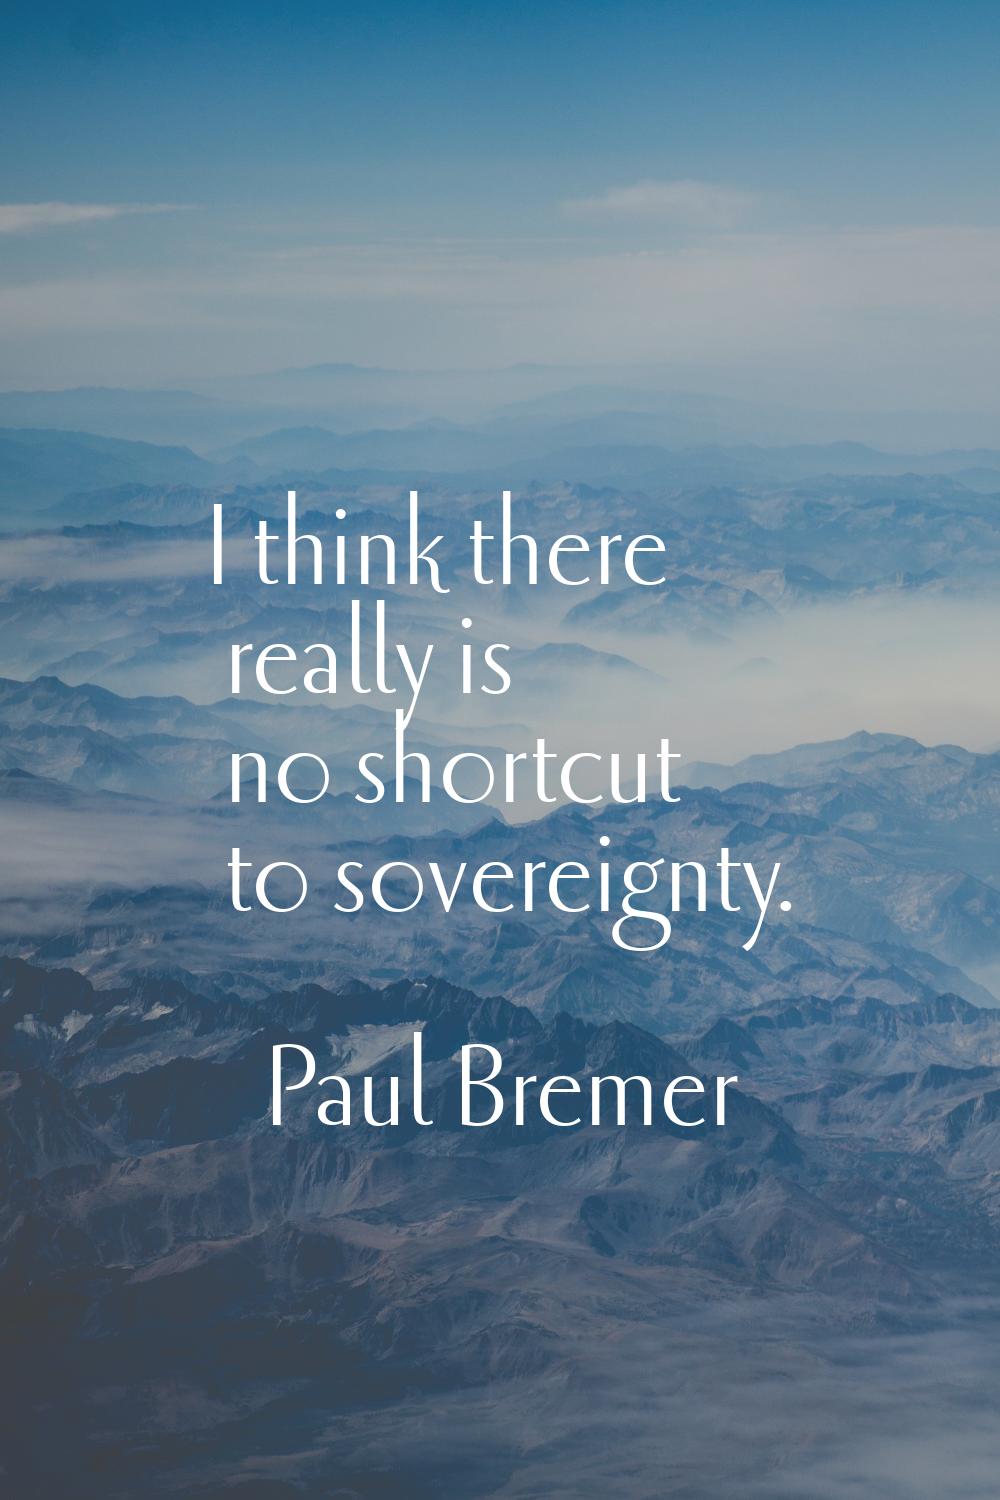 I think there really is no shortcut to sovereignty.